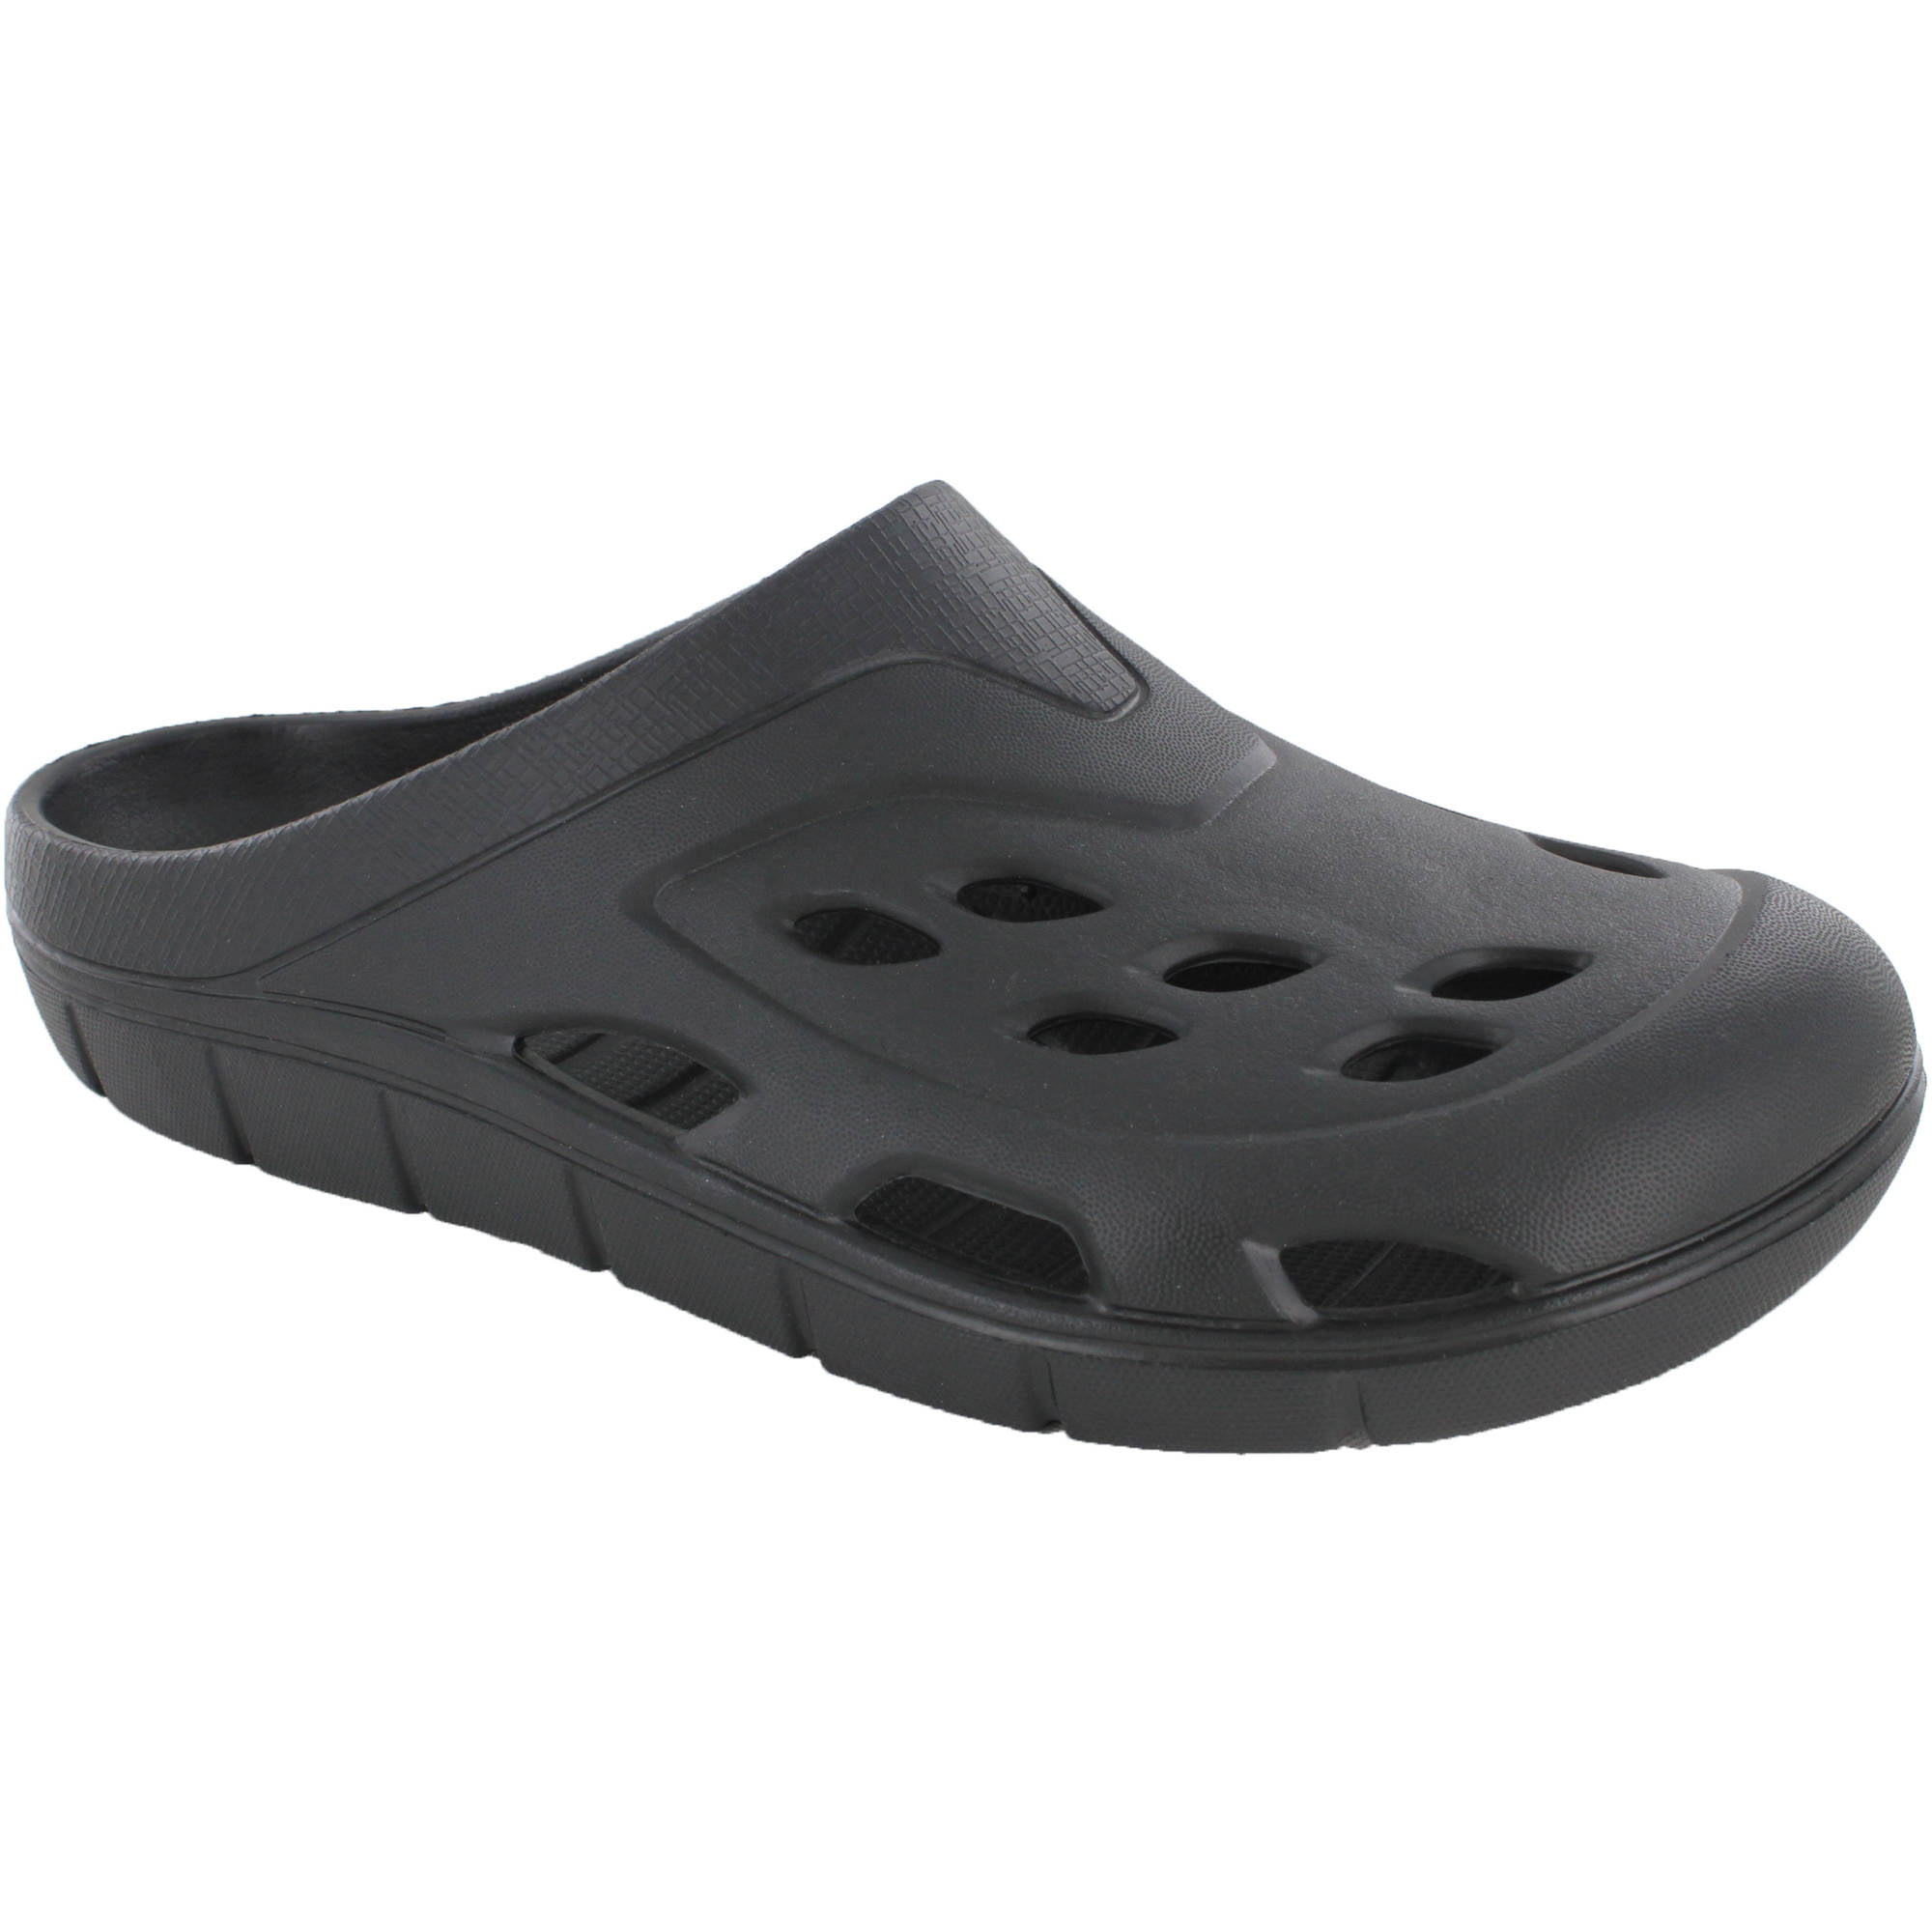 rubber clogs with holes